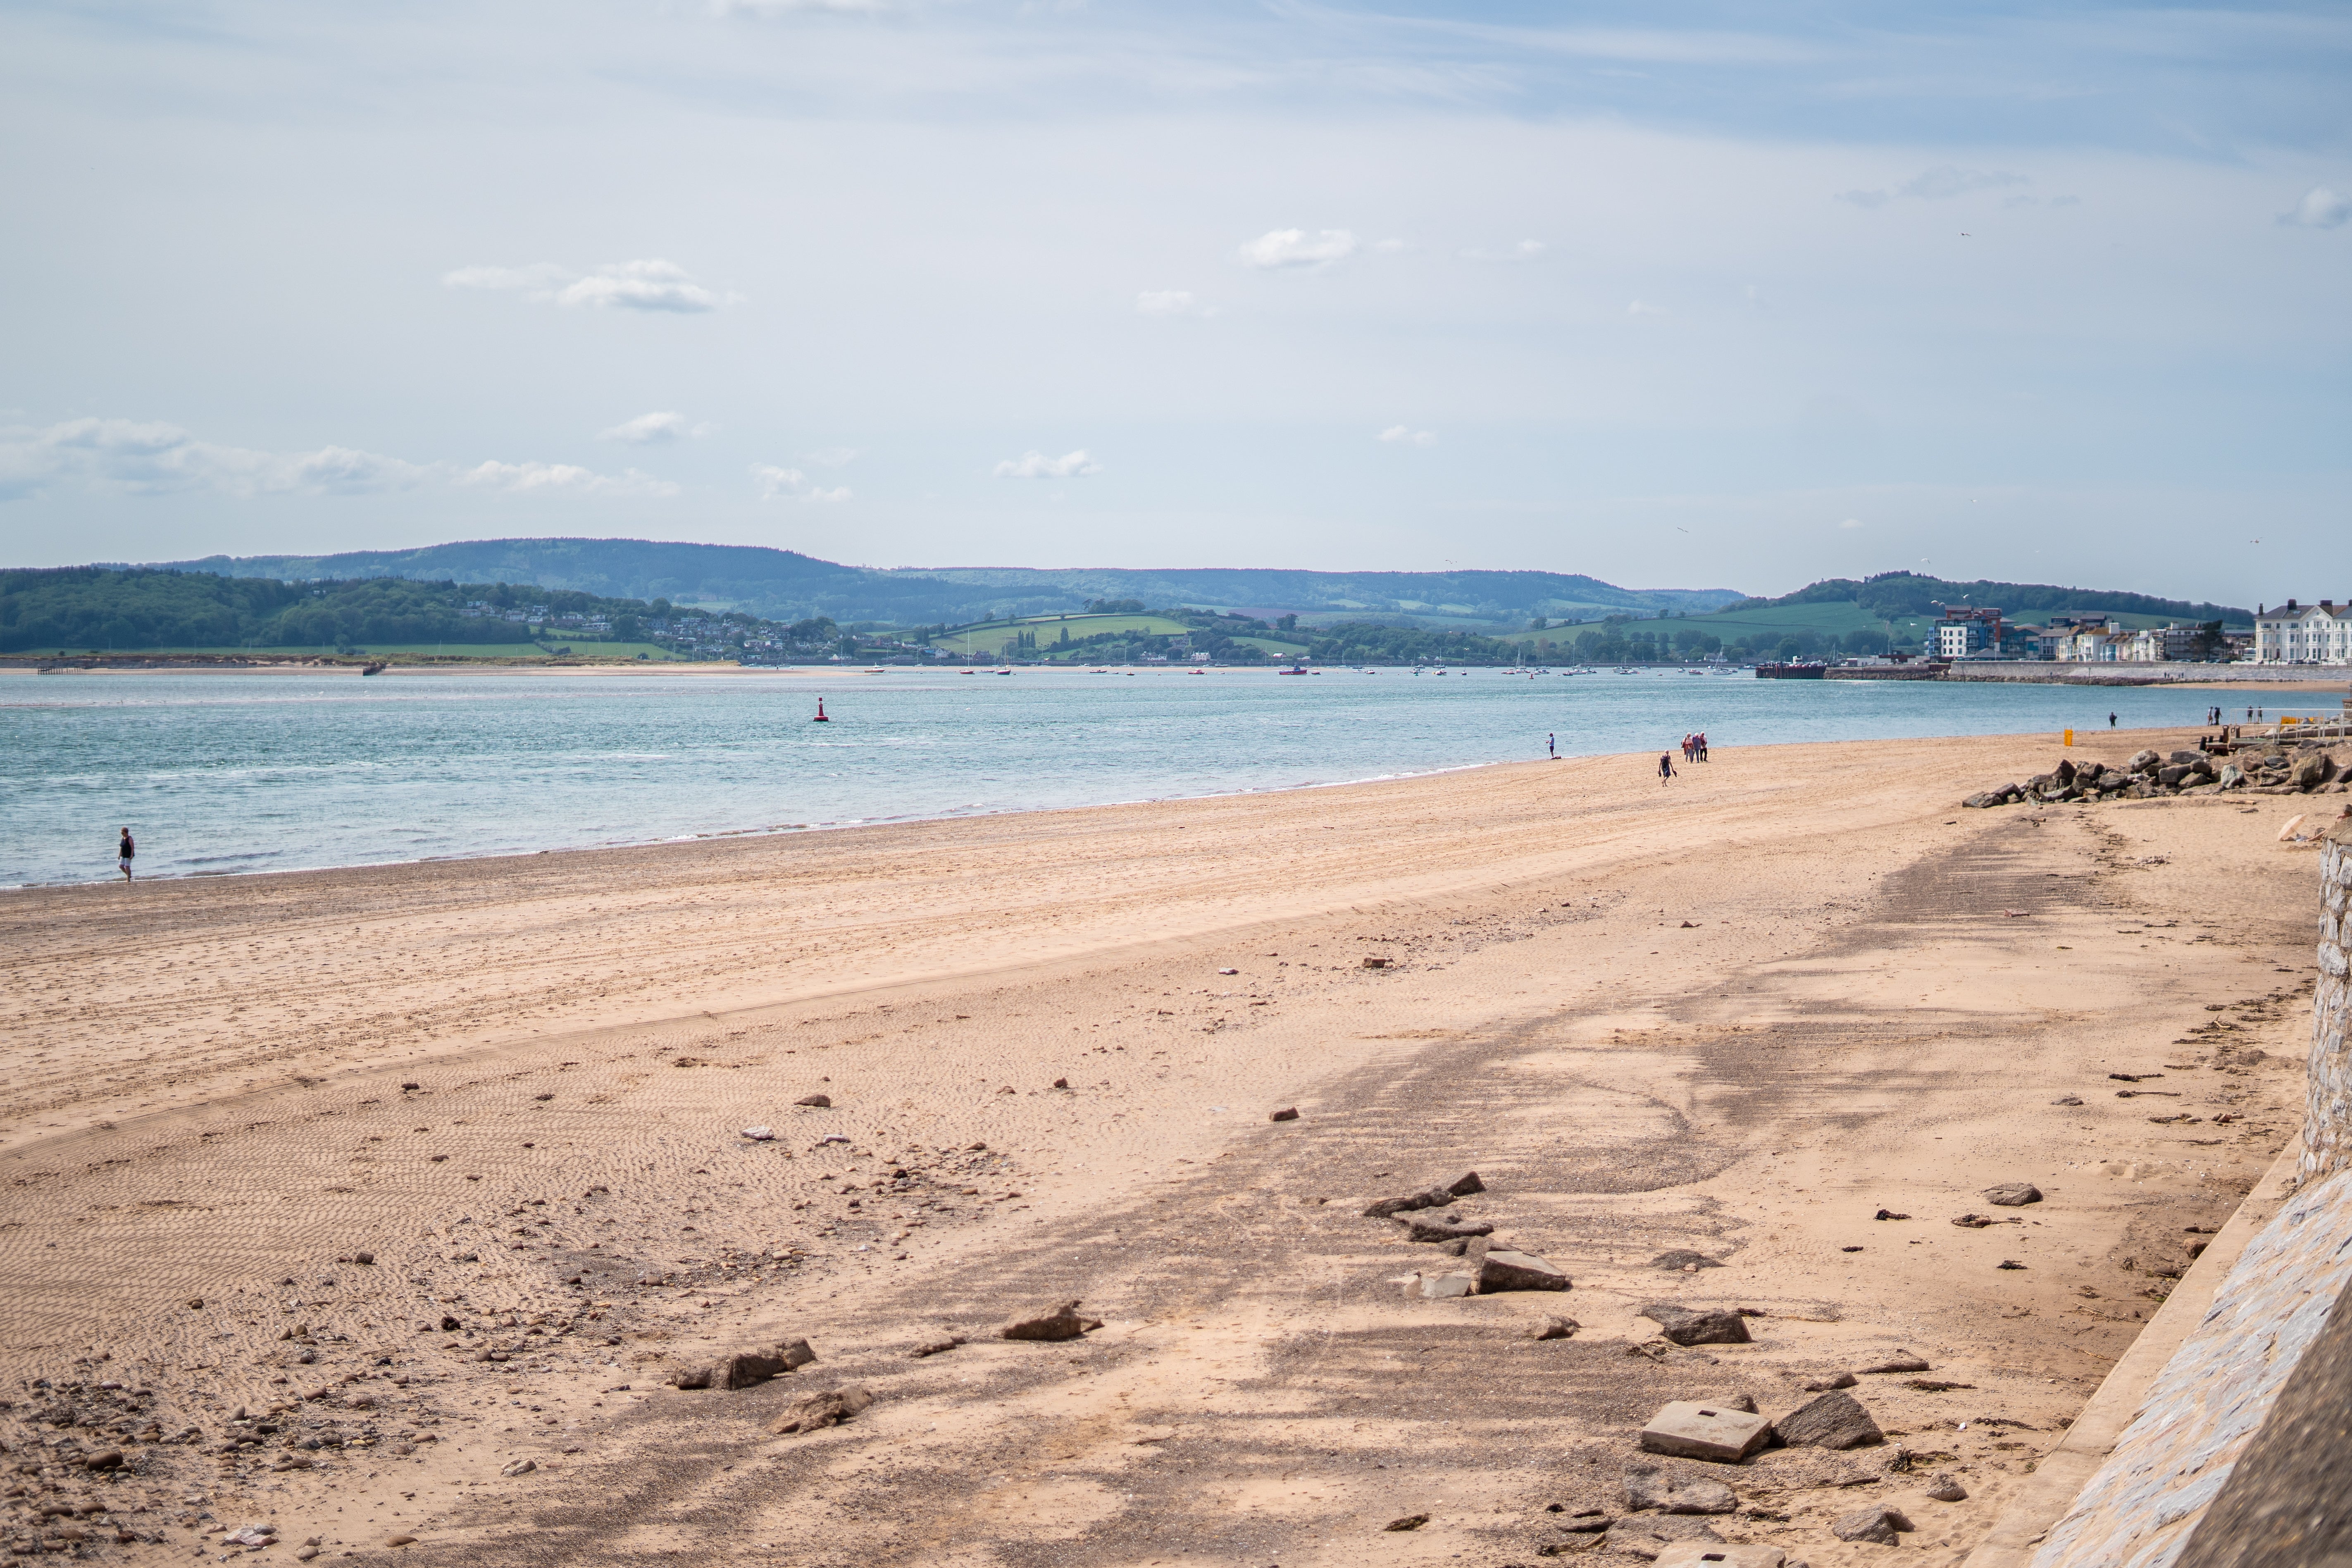 A view over Exmouth Beach